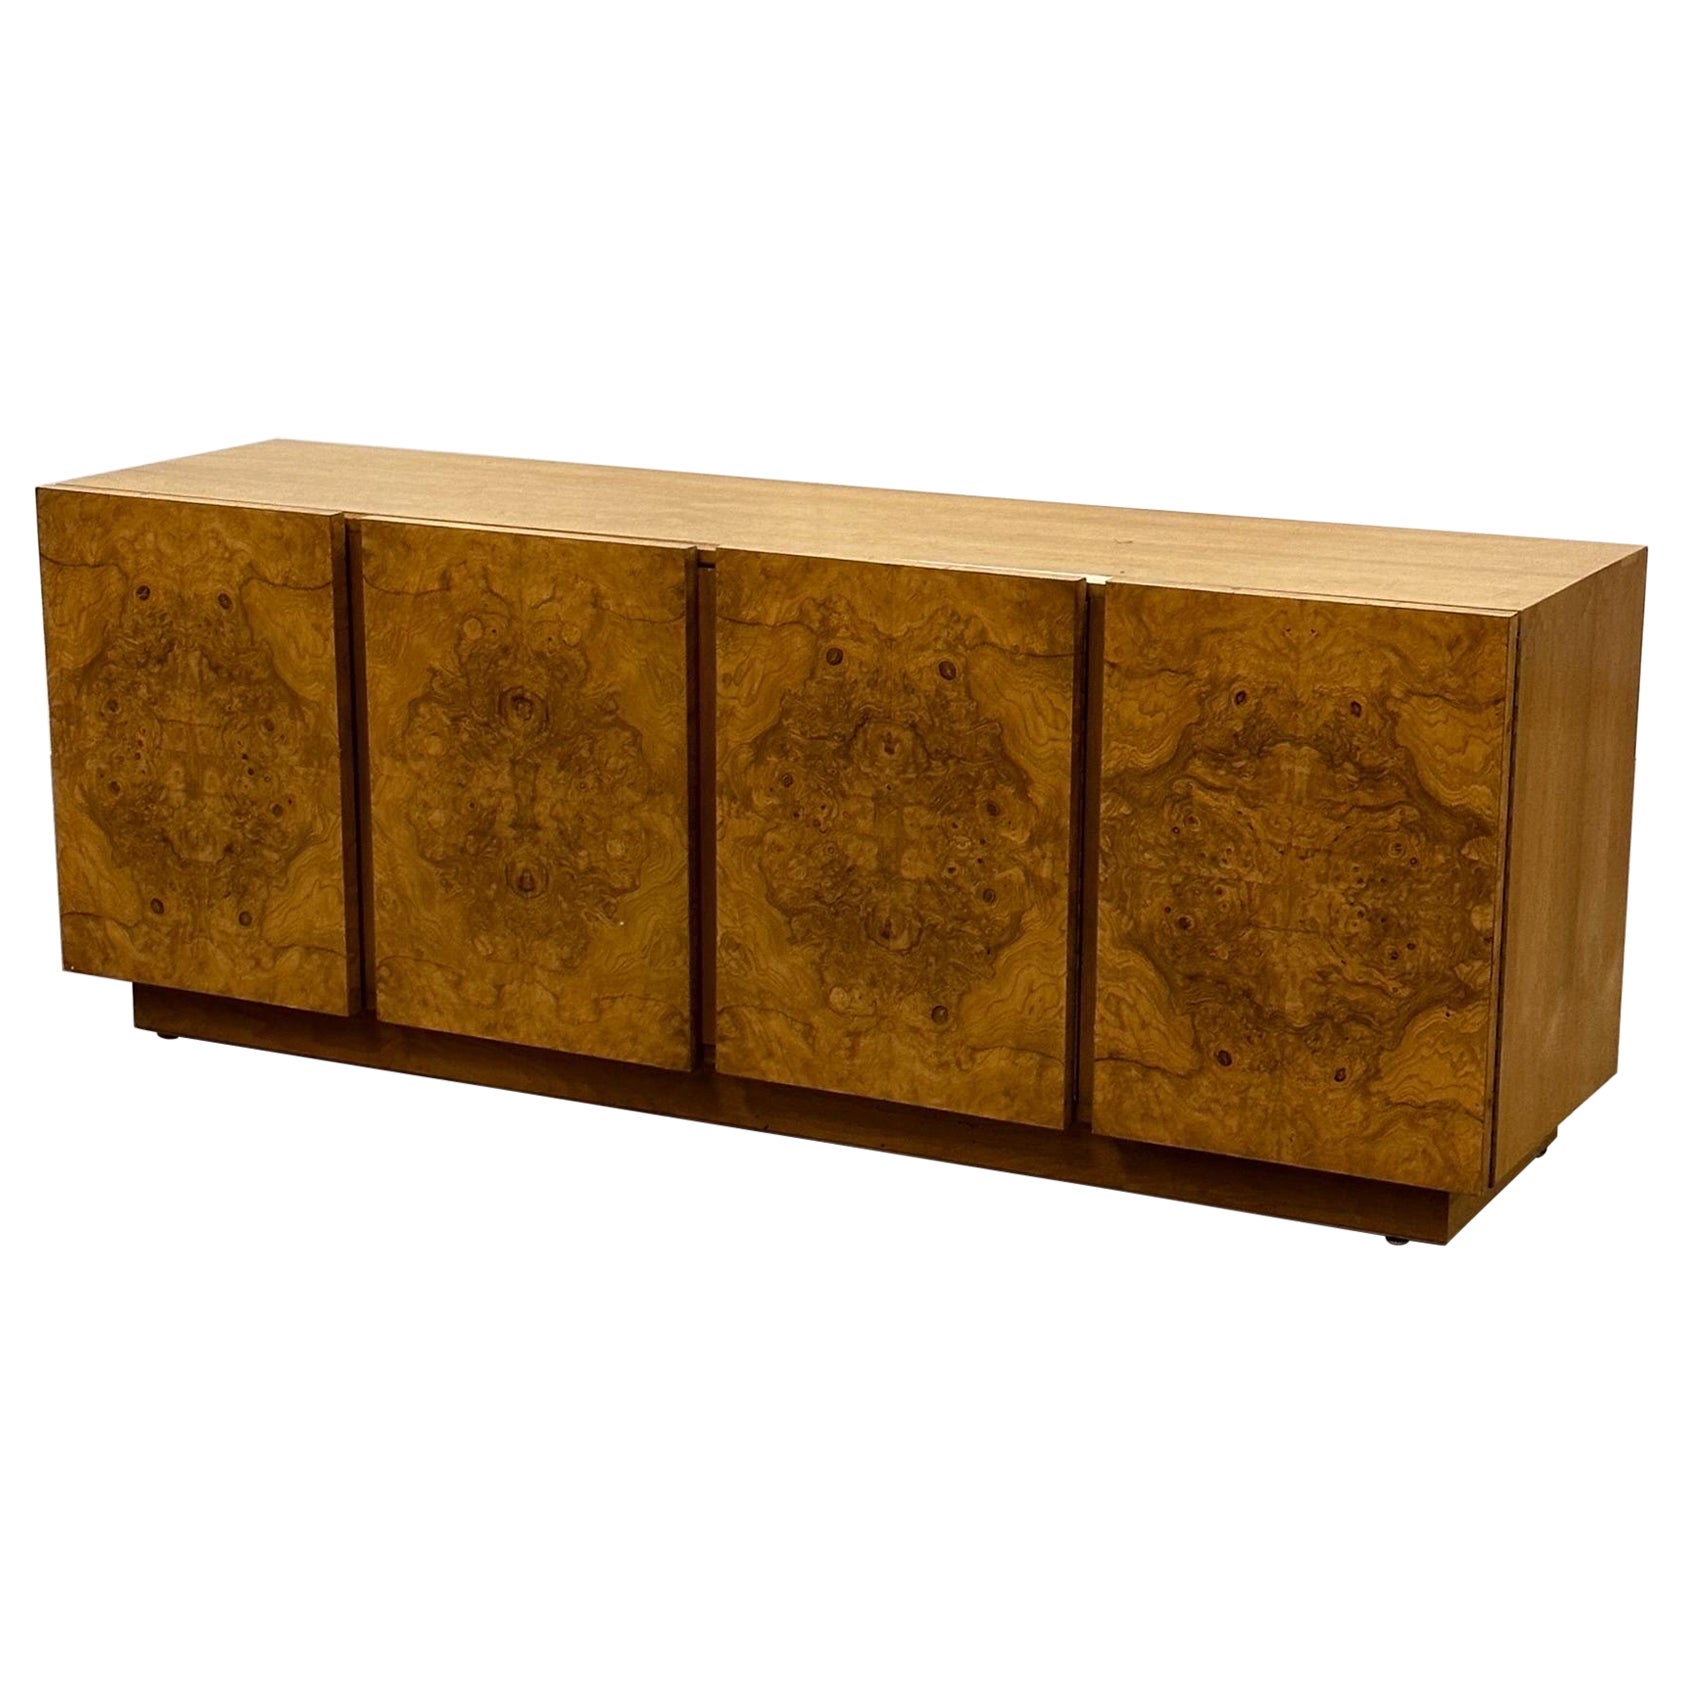 Burl Credenza/Sideboard by Lane For Sale